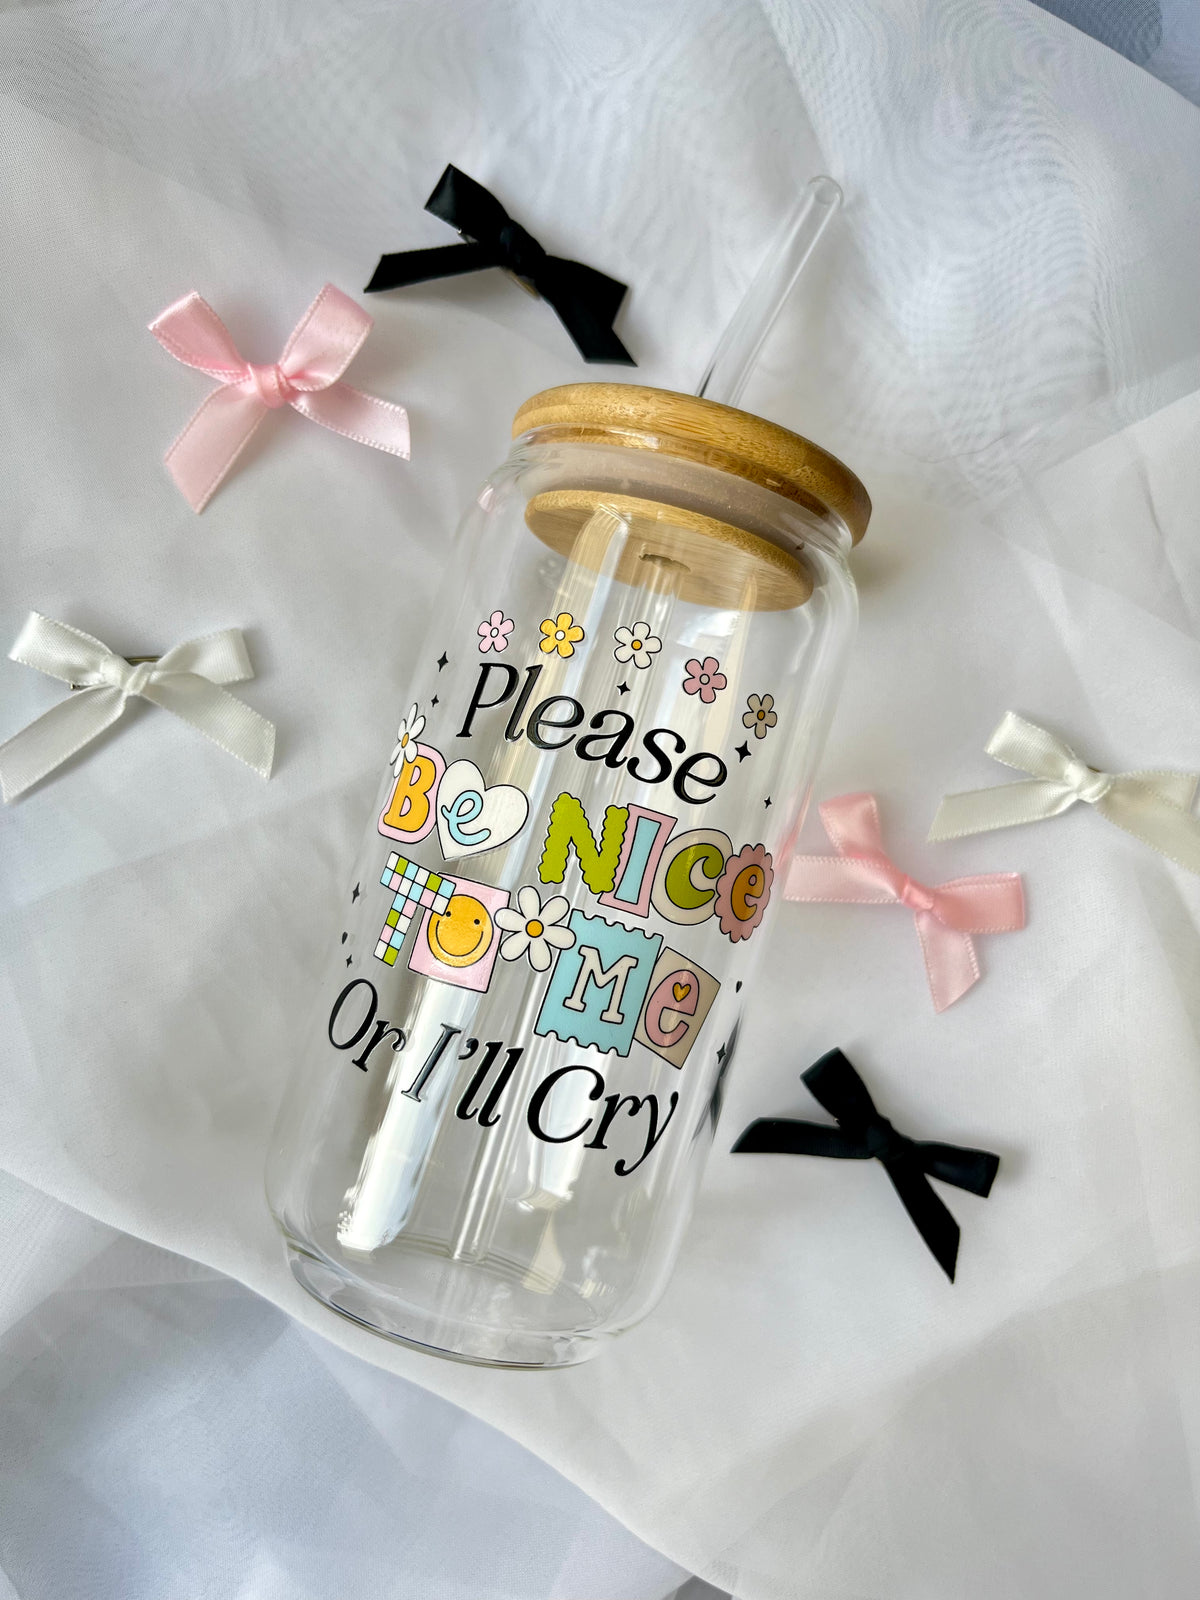 Please Be Nice to Me Cup | Glass Tumbler